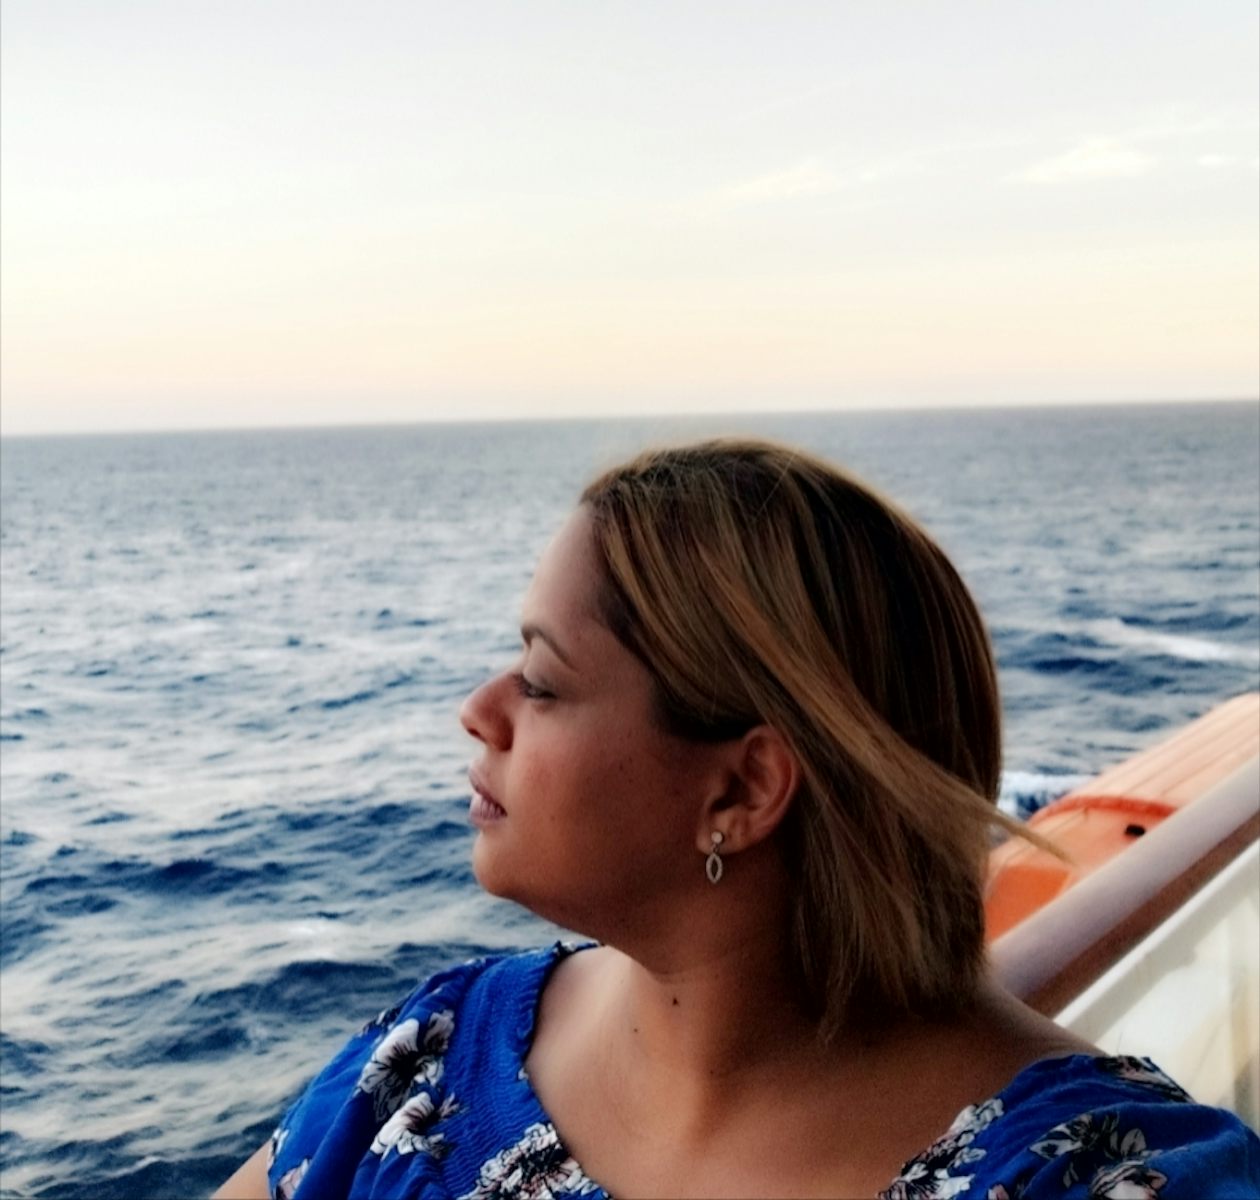 My wife on her birthday (17.03.2019) just admiring the view